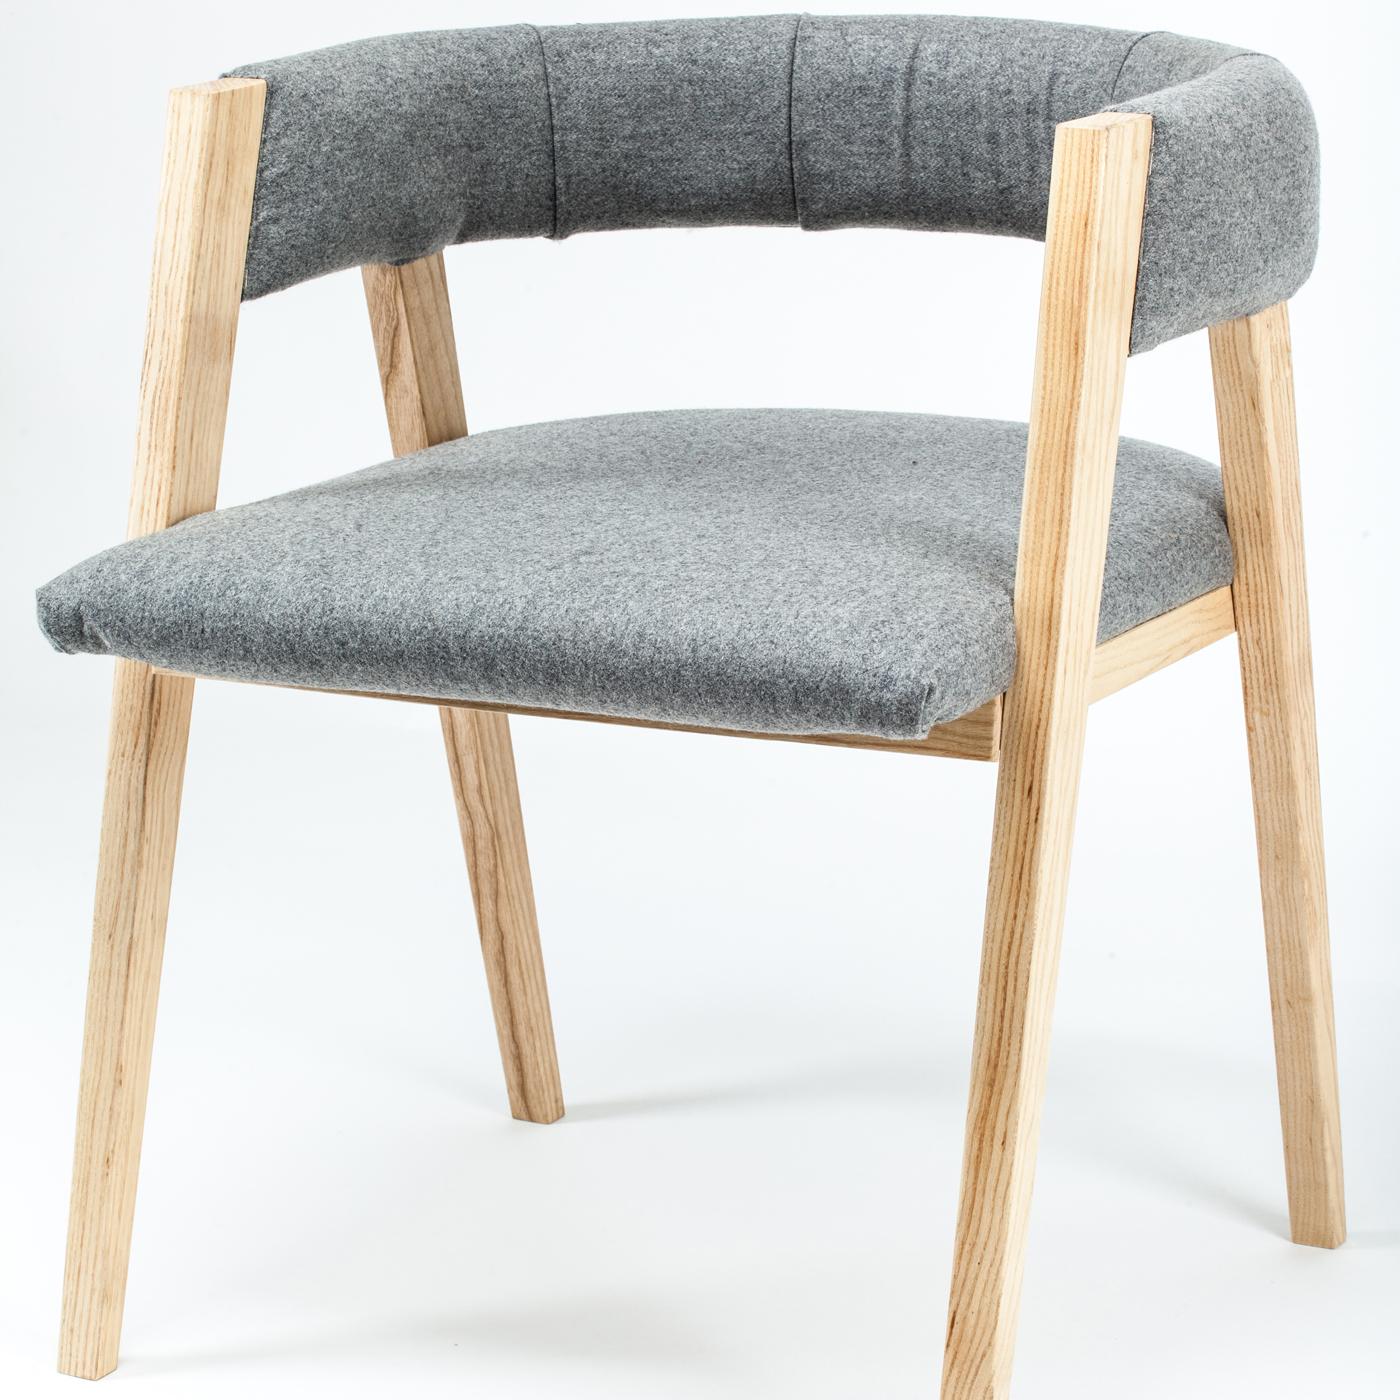 At first sight linear and austere, this chair conveys great visual lightness in a comfortable and elegant Silhouette. The perfectly balanced ashwood frame showcases four spiked legs that support a padded semi-circular backrest and seat that are